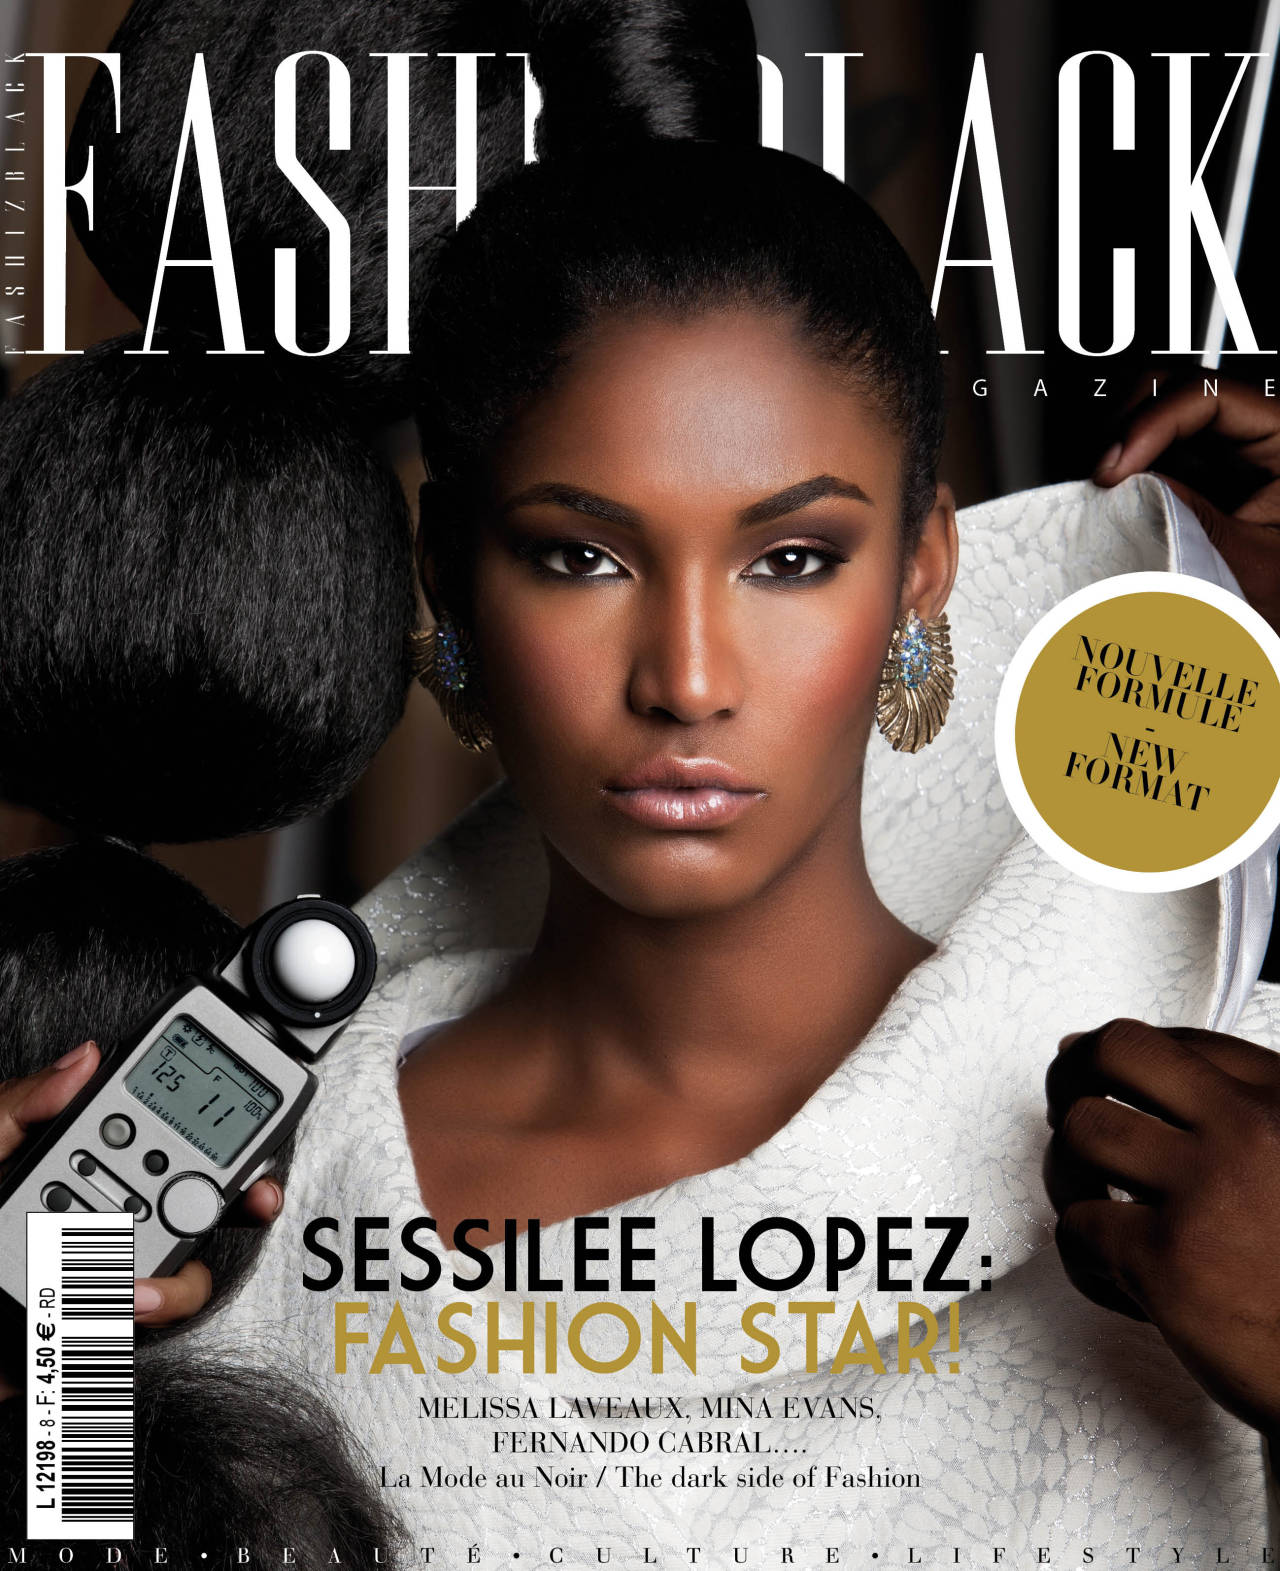 blackandkillingit:</p><br />
<p>Supermodel Sessilee Lopez covers FASHIZBLACK September/October 2013 issue. Available next week.  Stockists: www.fashizblack.com (New website SOON!)<br /><br />
